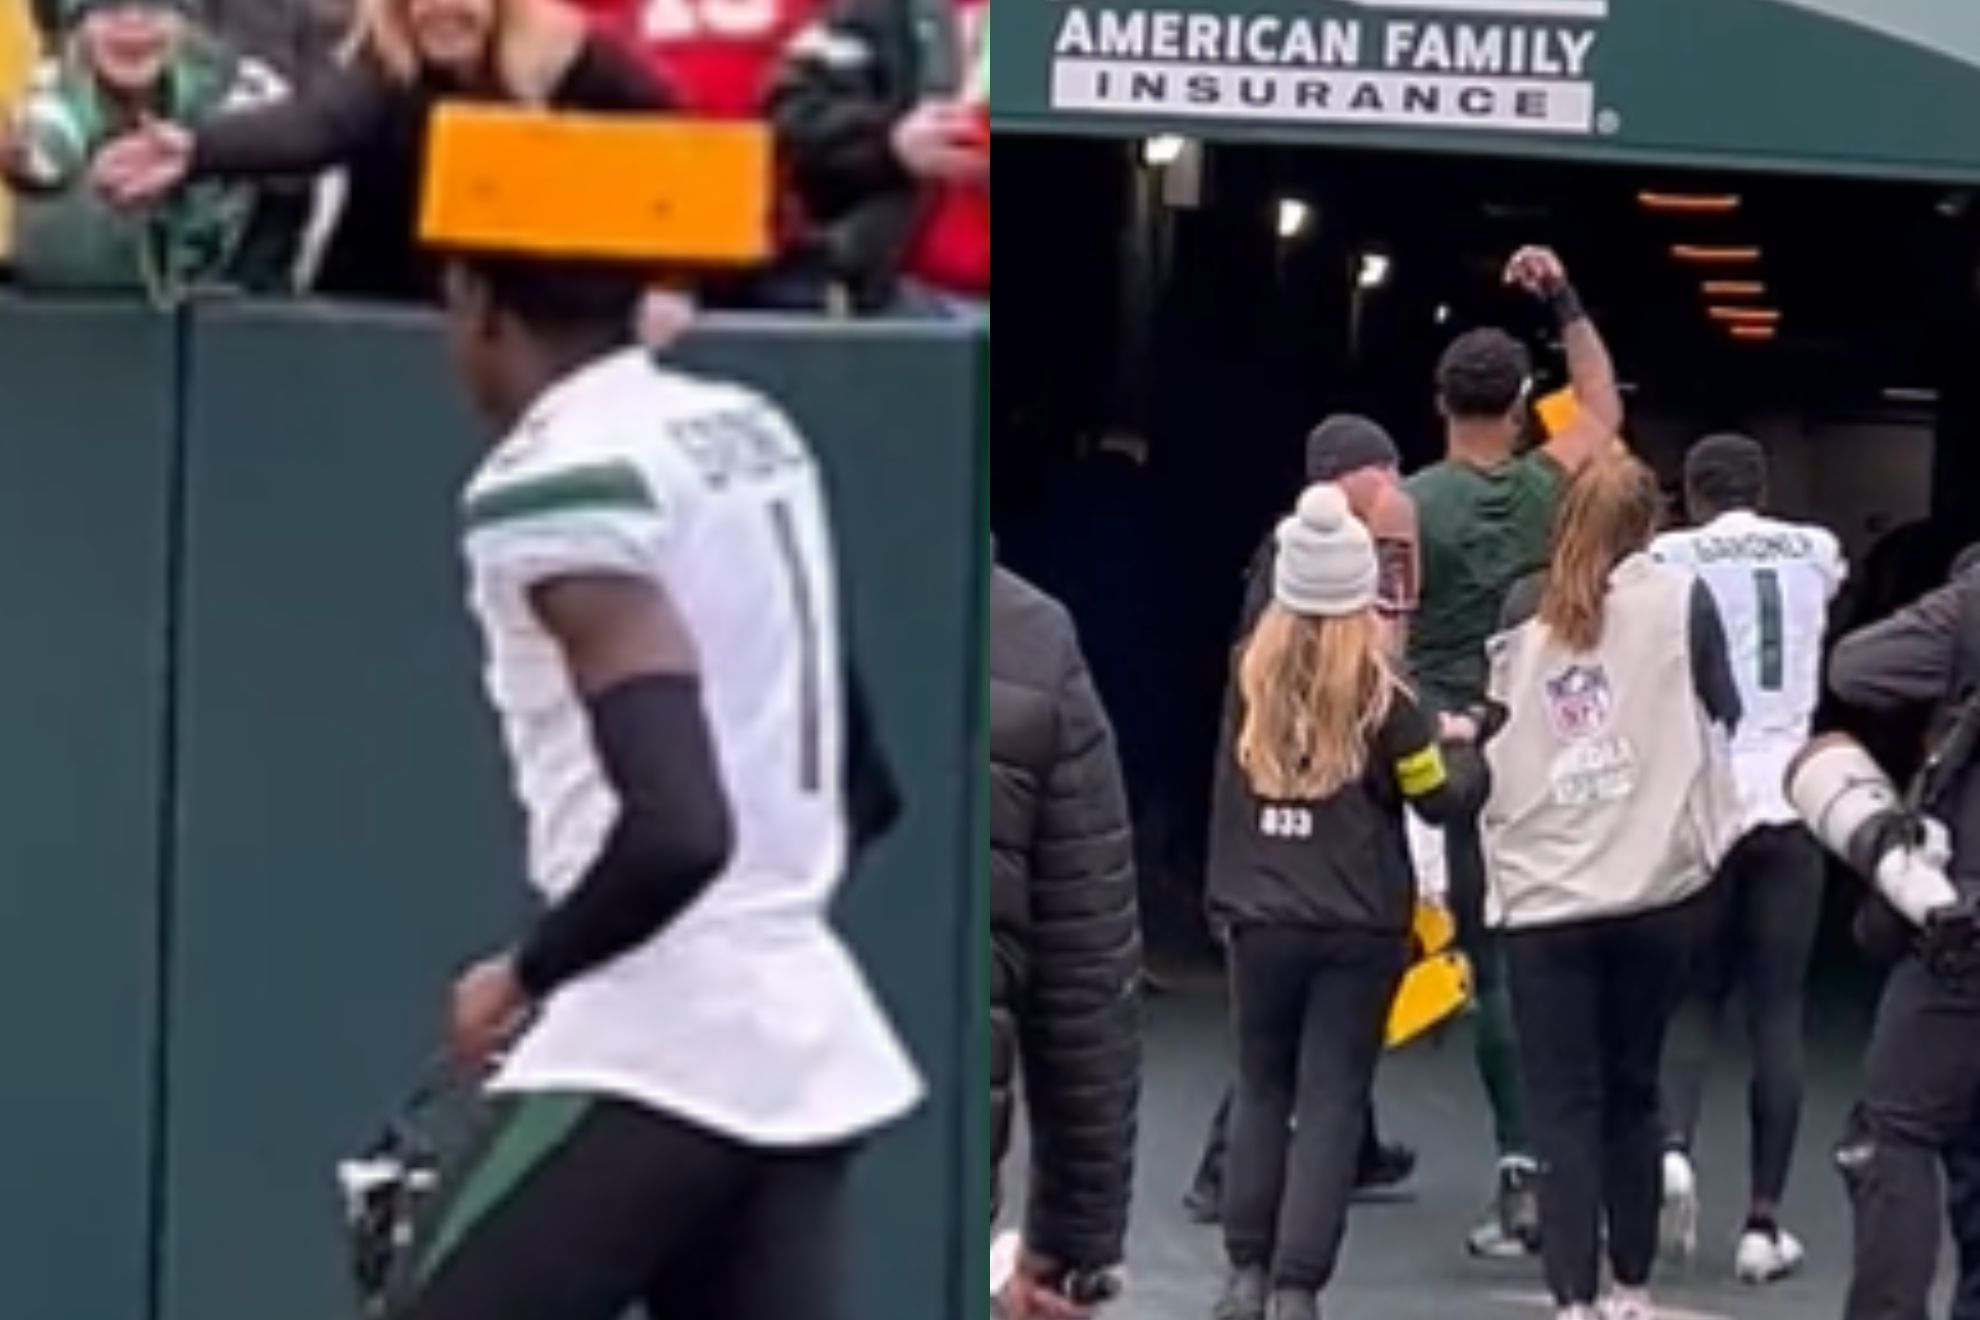 Say cheese: Jets' Sauce Gardner gets special piece of headgear after  beating Packers